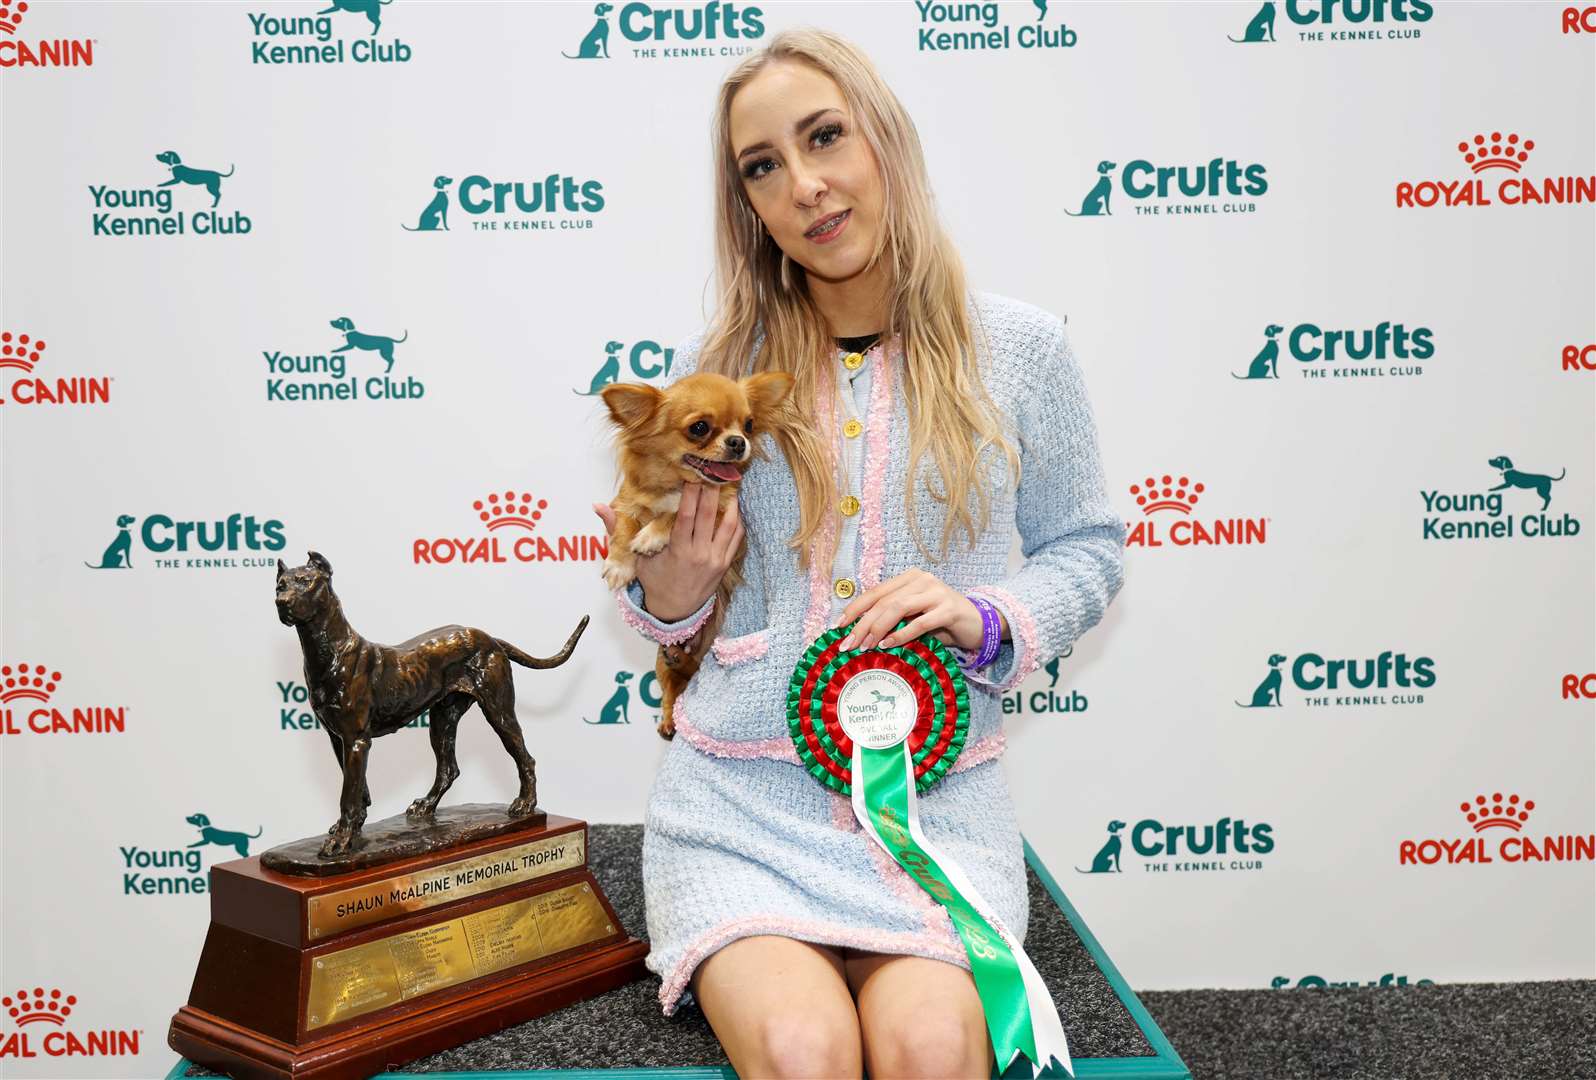 Izzy King with River, a Chihuahua (Long Coat). Picture: Beat Media/The Kennel Club